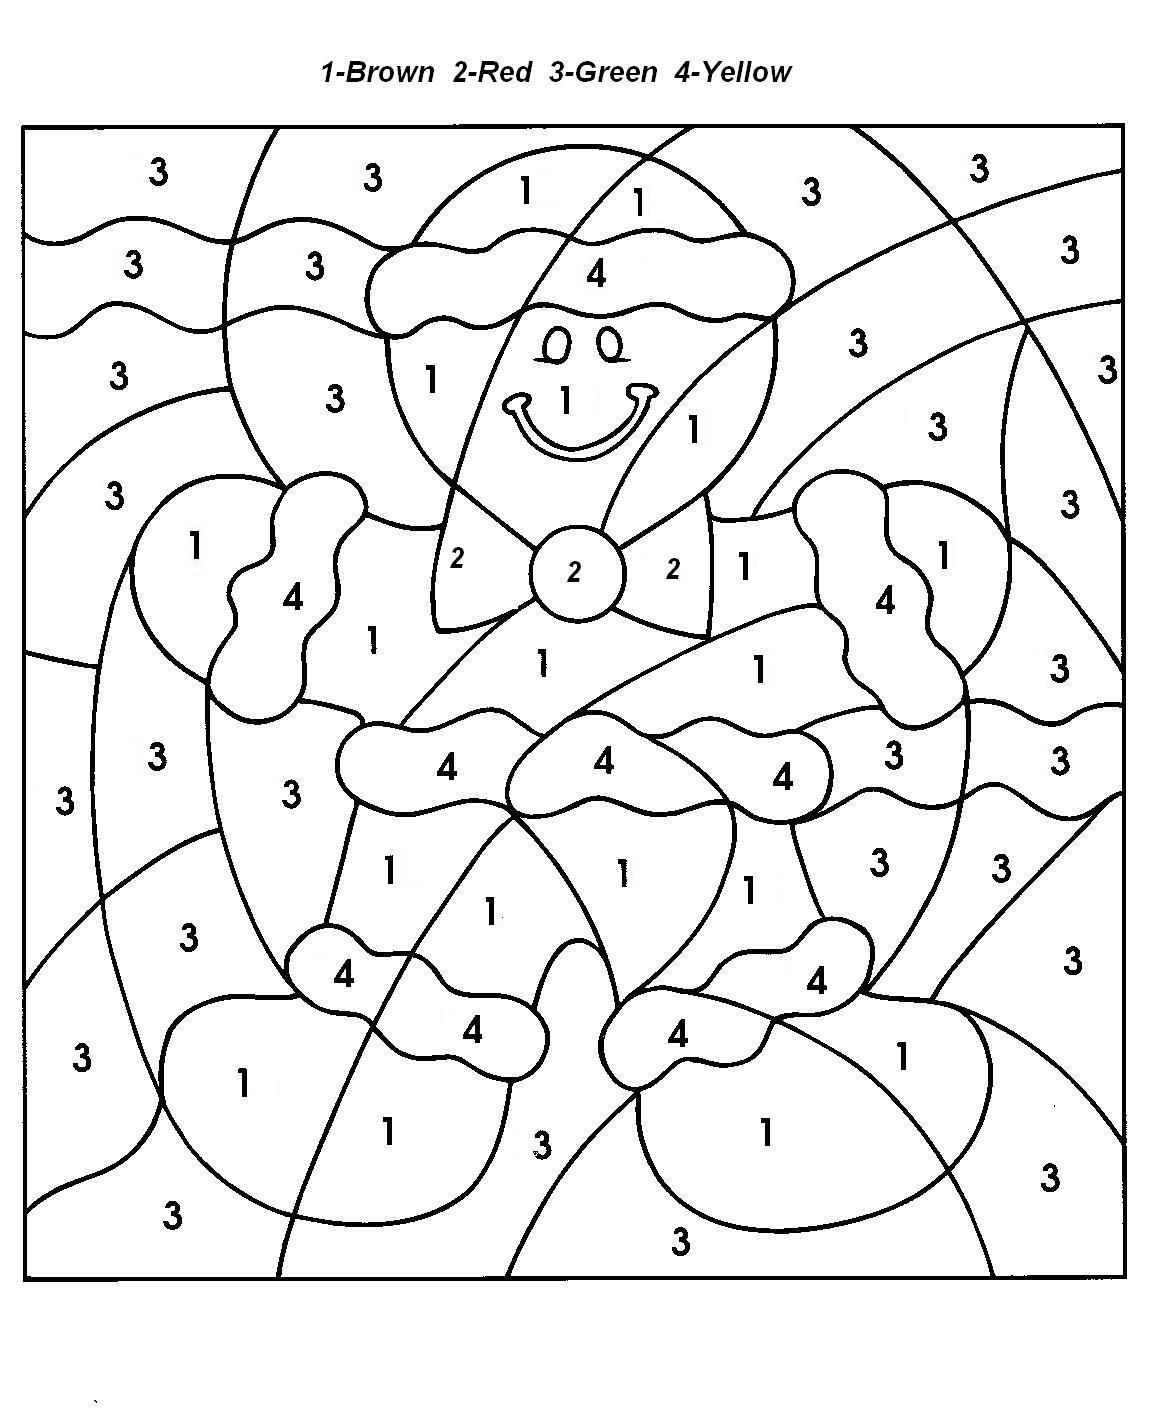 Coloring page: Coloring by numbers (Educational) #125501 - Printable coloring pages